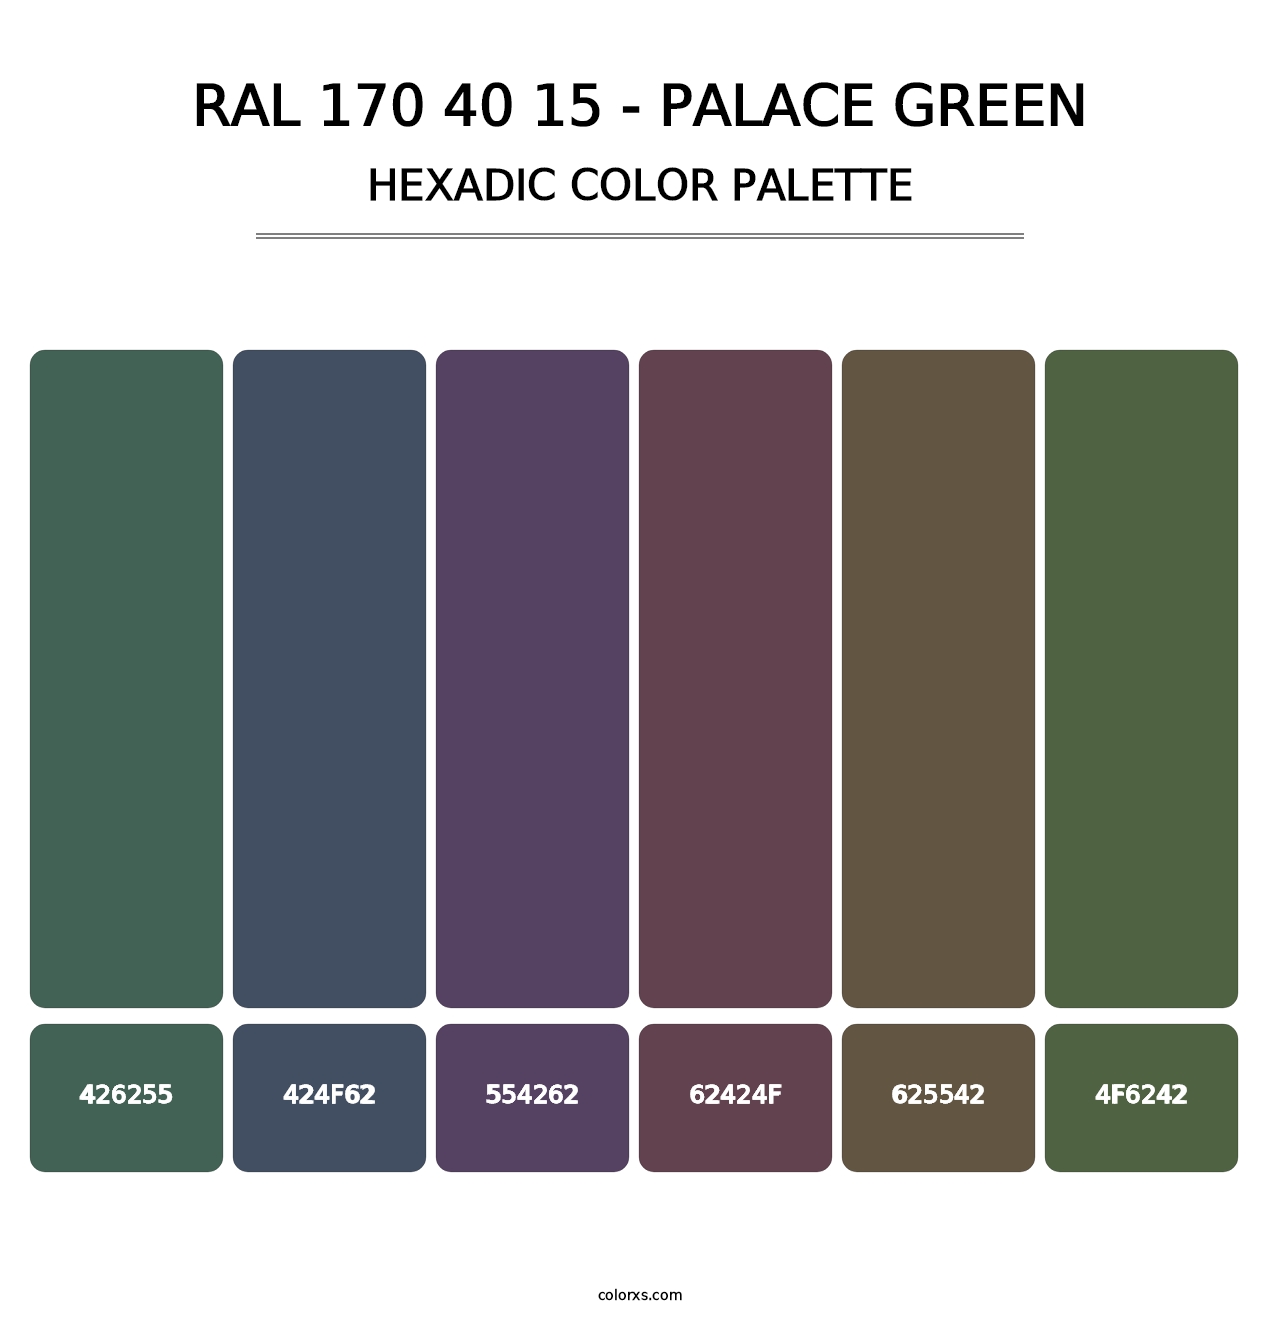 RAL 170 40 15 - Palace Green - Hexadic Color Palette